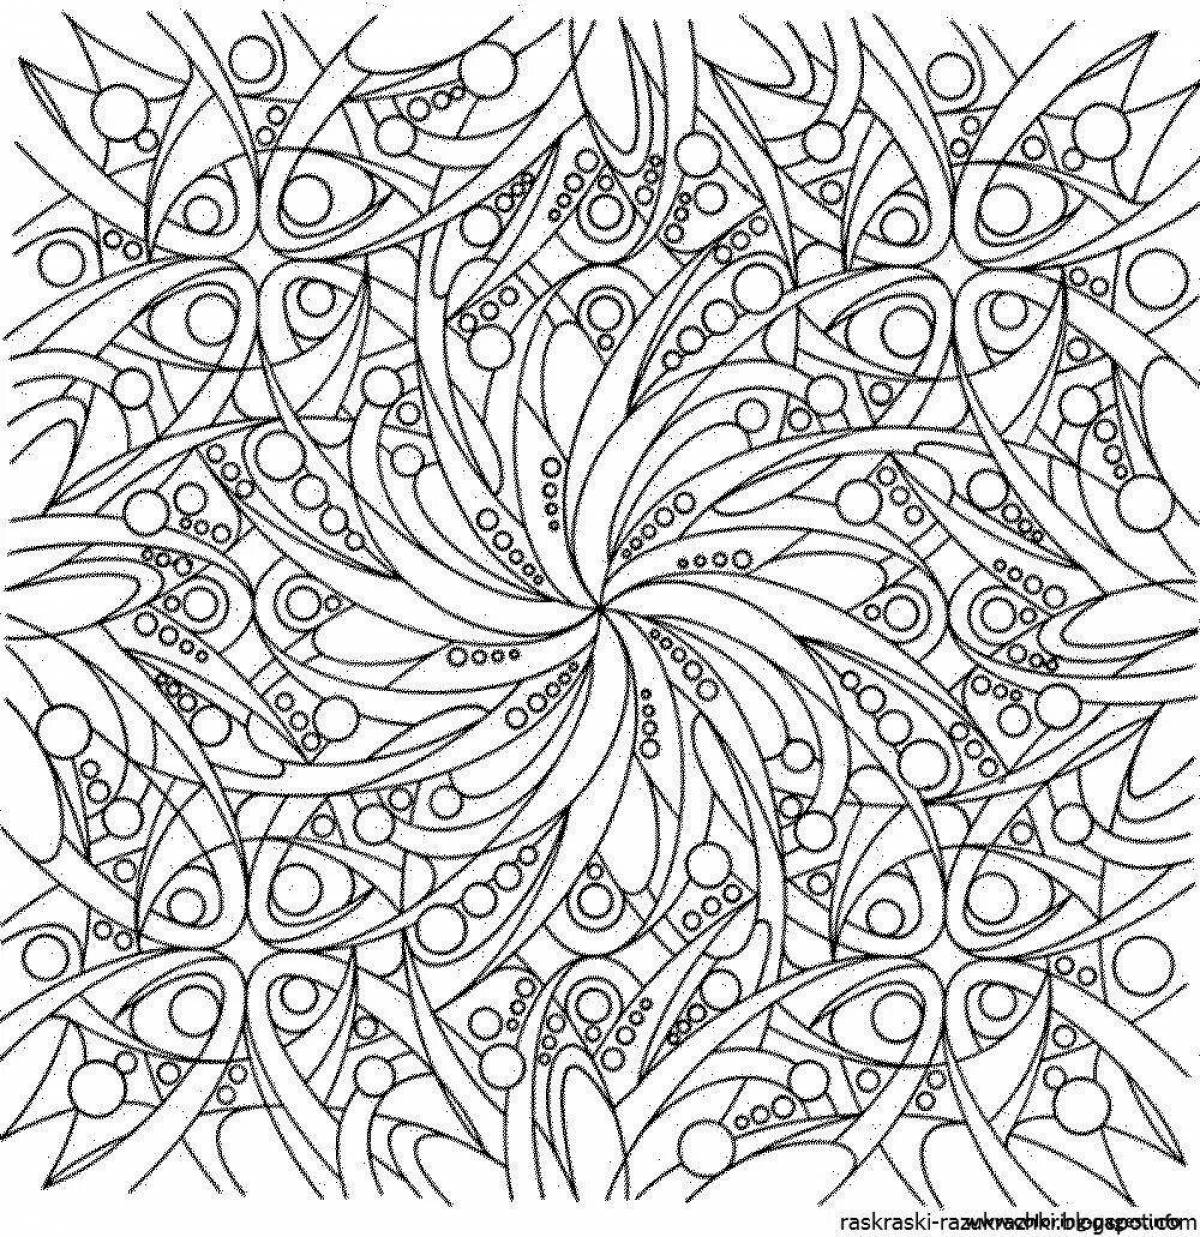 Soothing anti-stress coloring book for adults